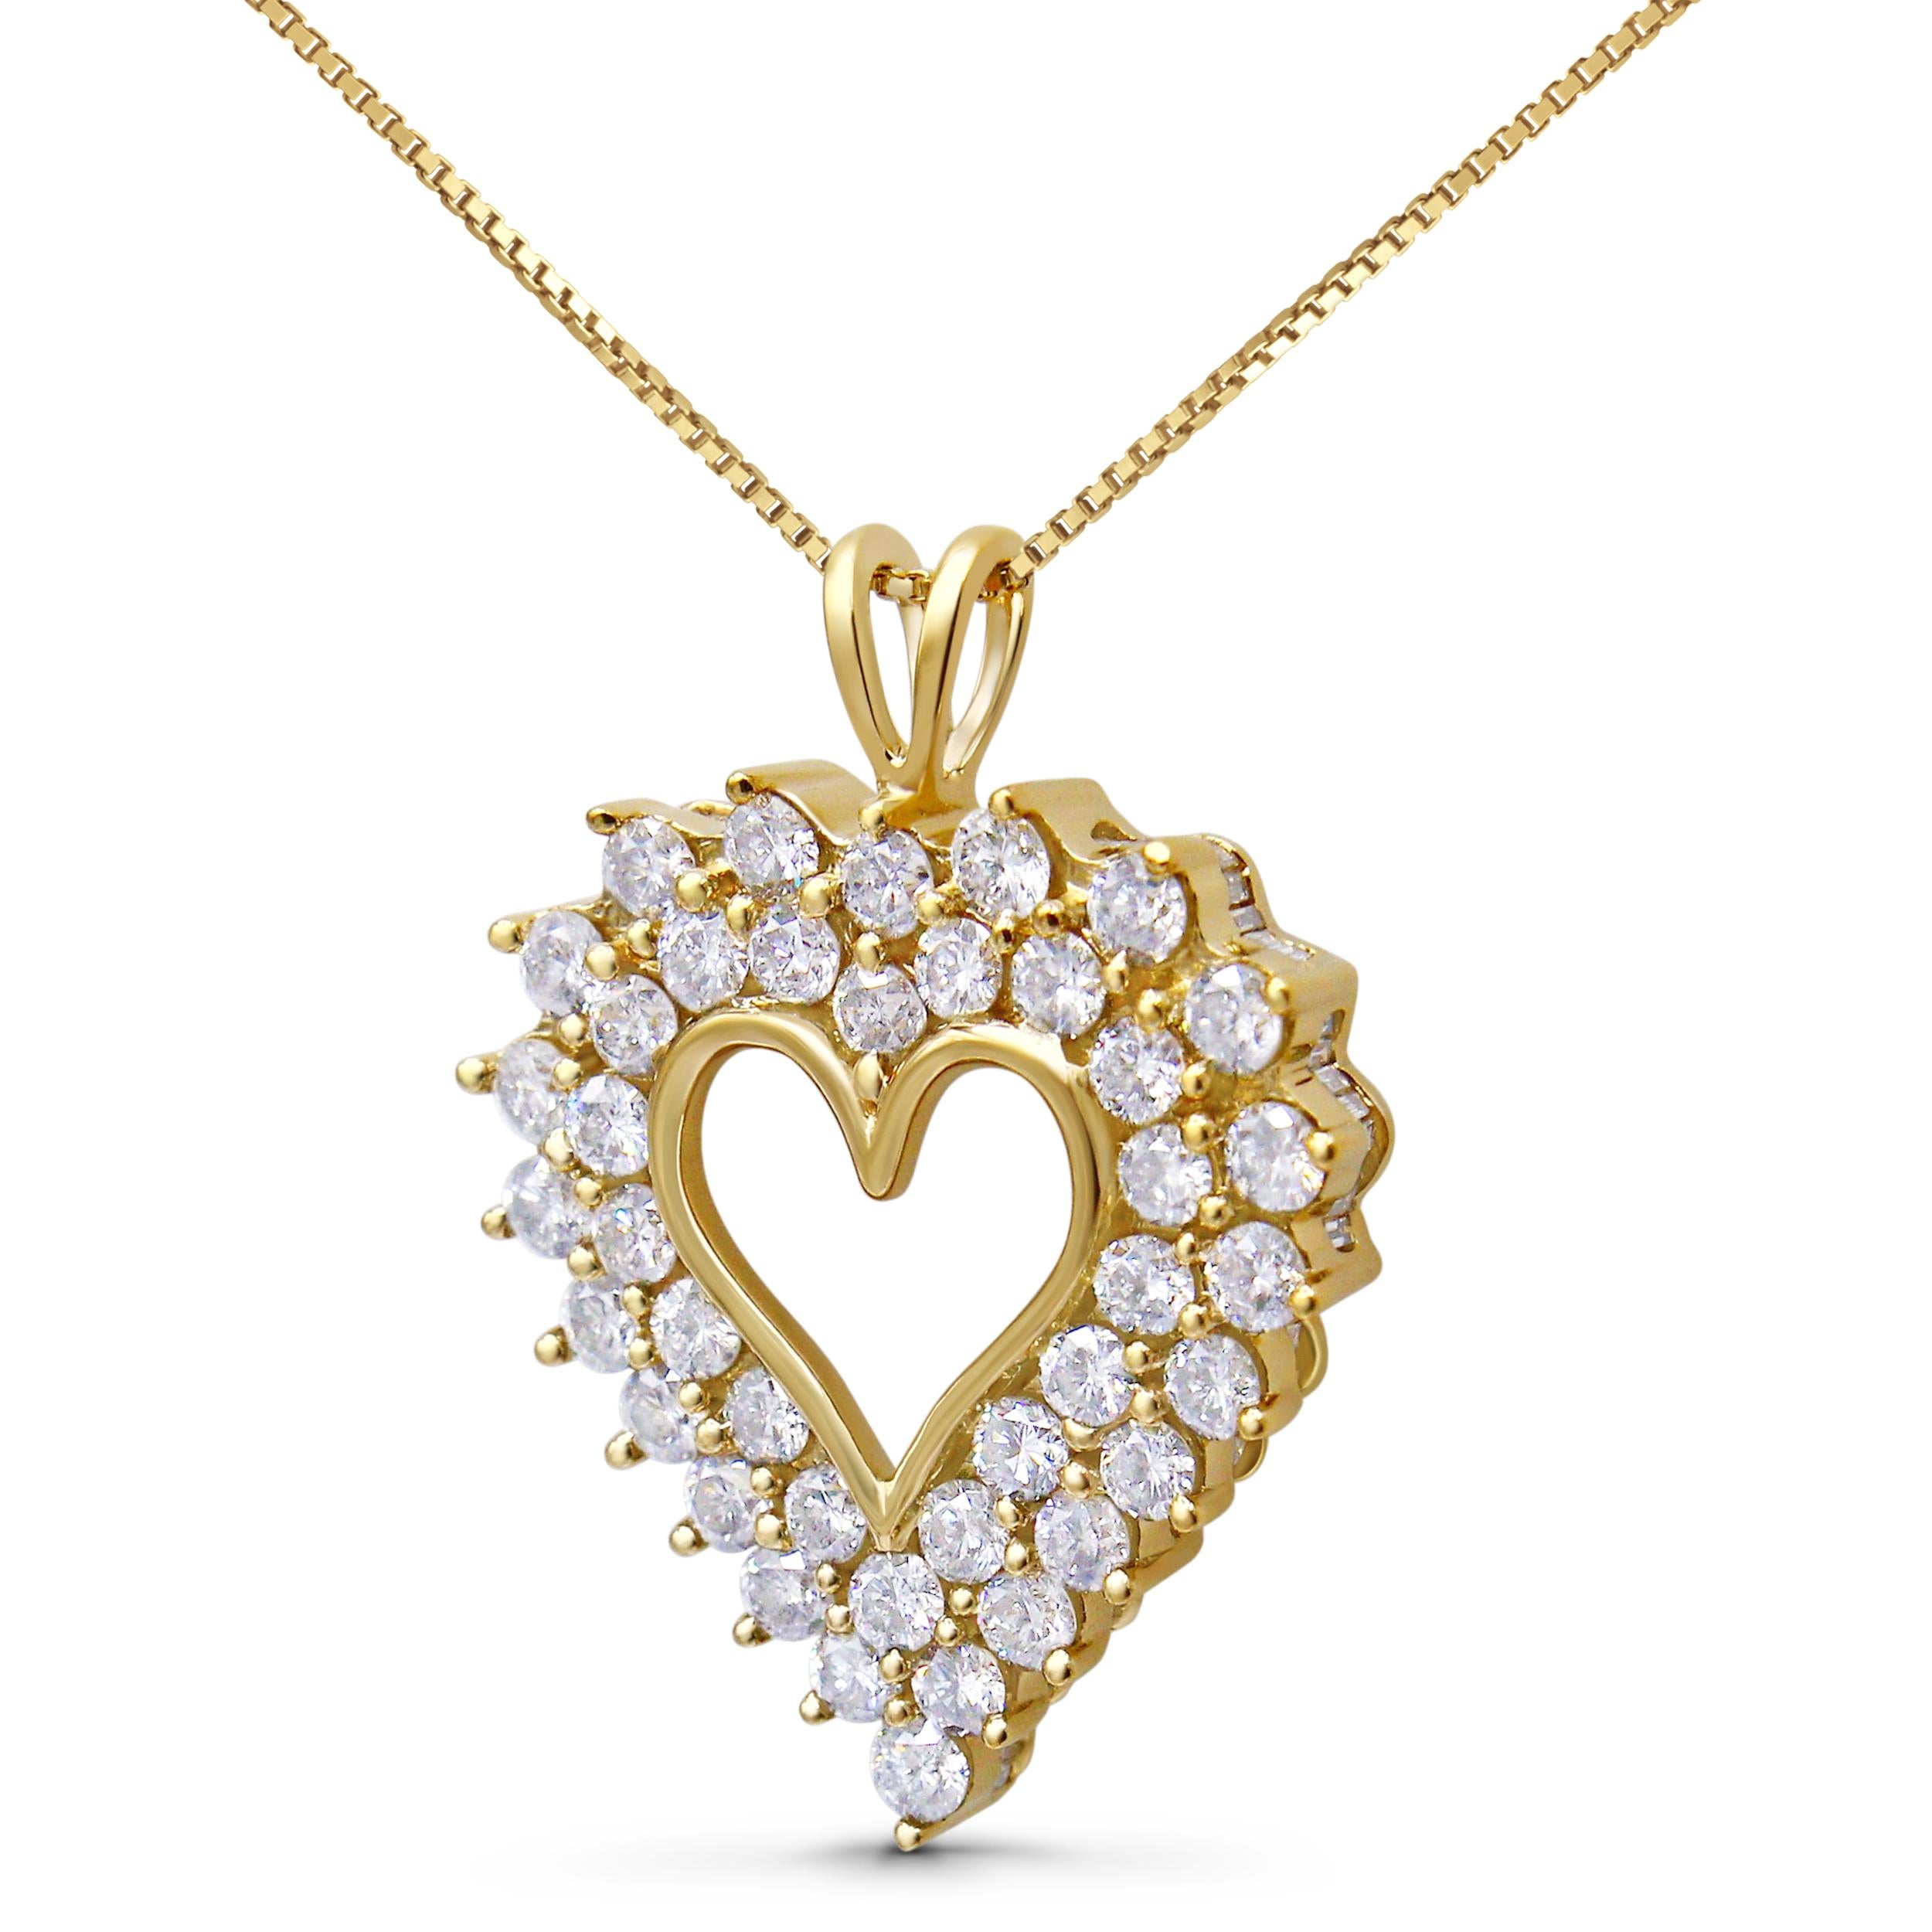 Enveloped in the warm embrace of 14K yellow gold plating, this .925 sterling silver heart pendant necklace is a symphony of love and radiance. At its heart lies a polished, heart-shaped outline, caressed by a double frame of twinkling 1/15 ct. round